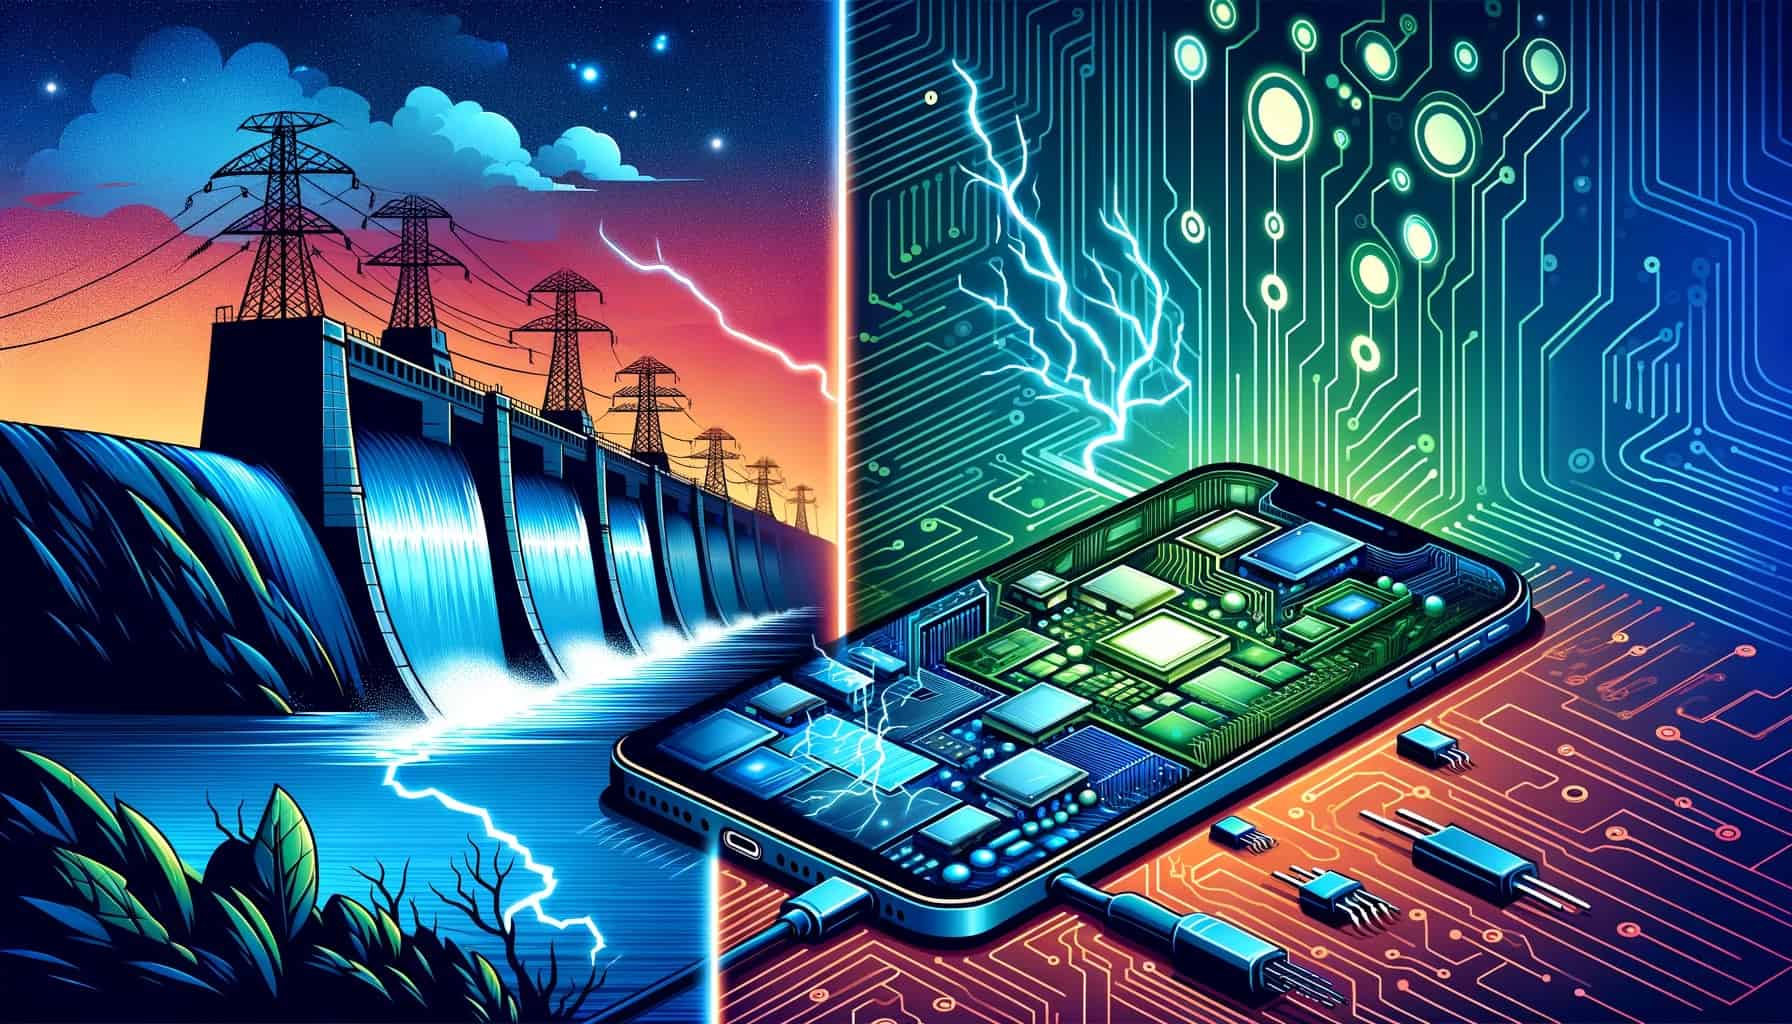 Electrical and electronics